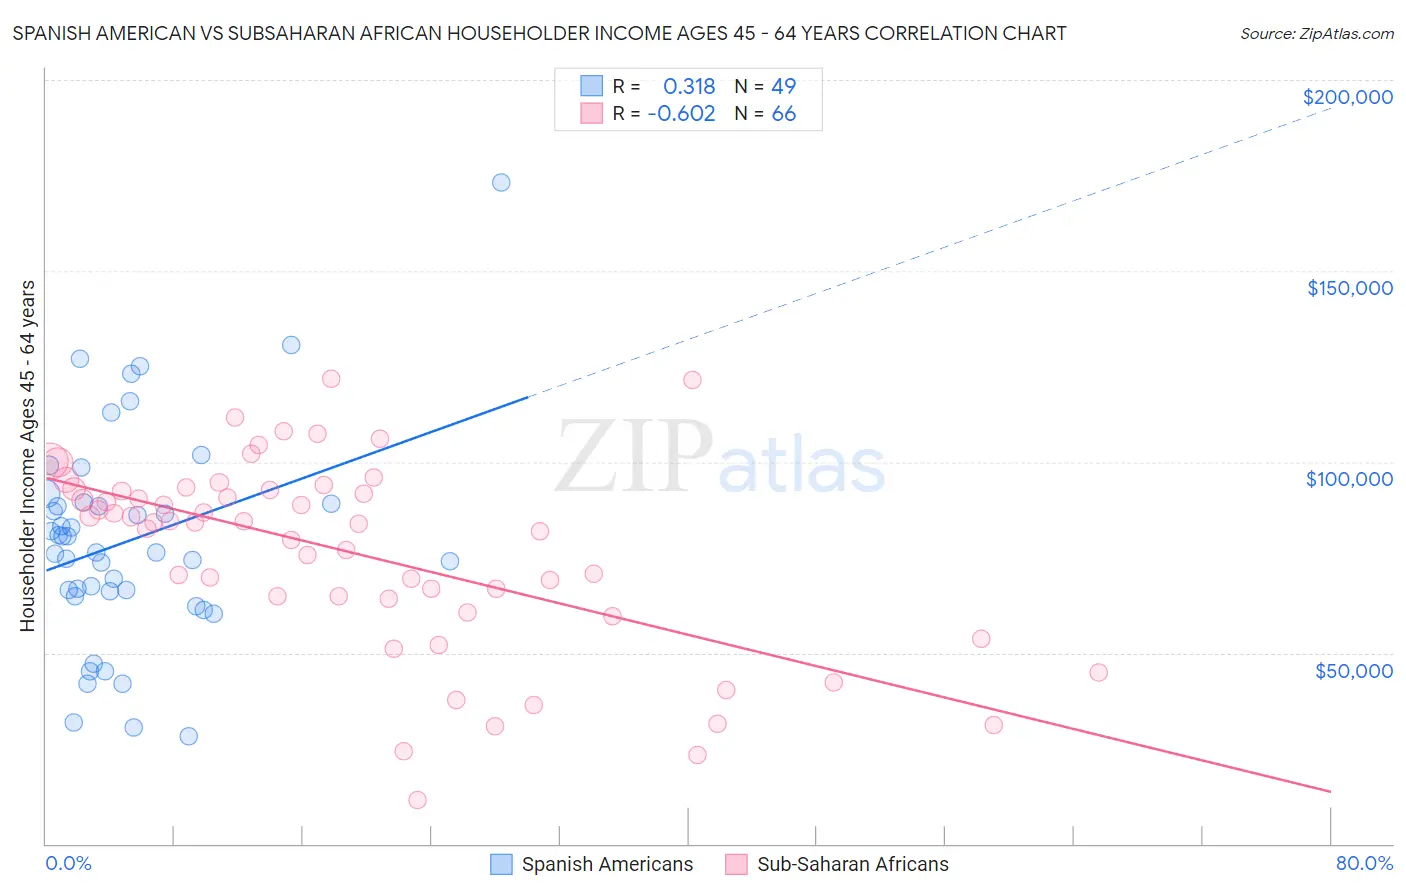 Spanish American vs Subsaharan African Householder Income Ages 45 - 64 years